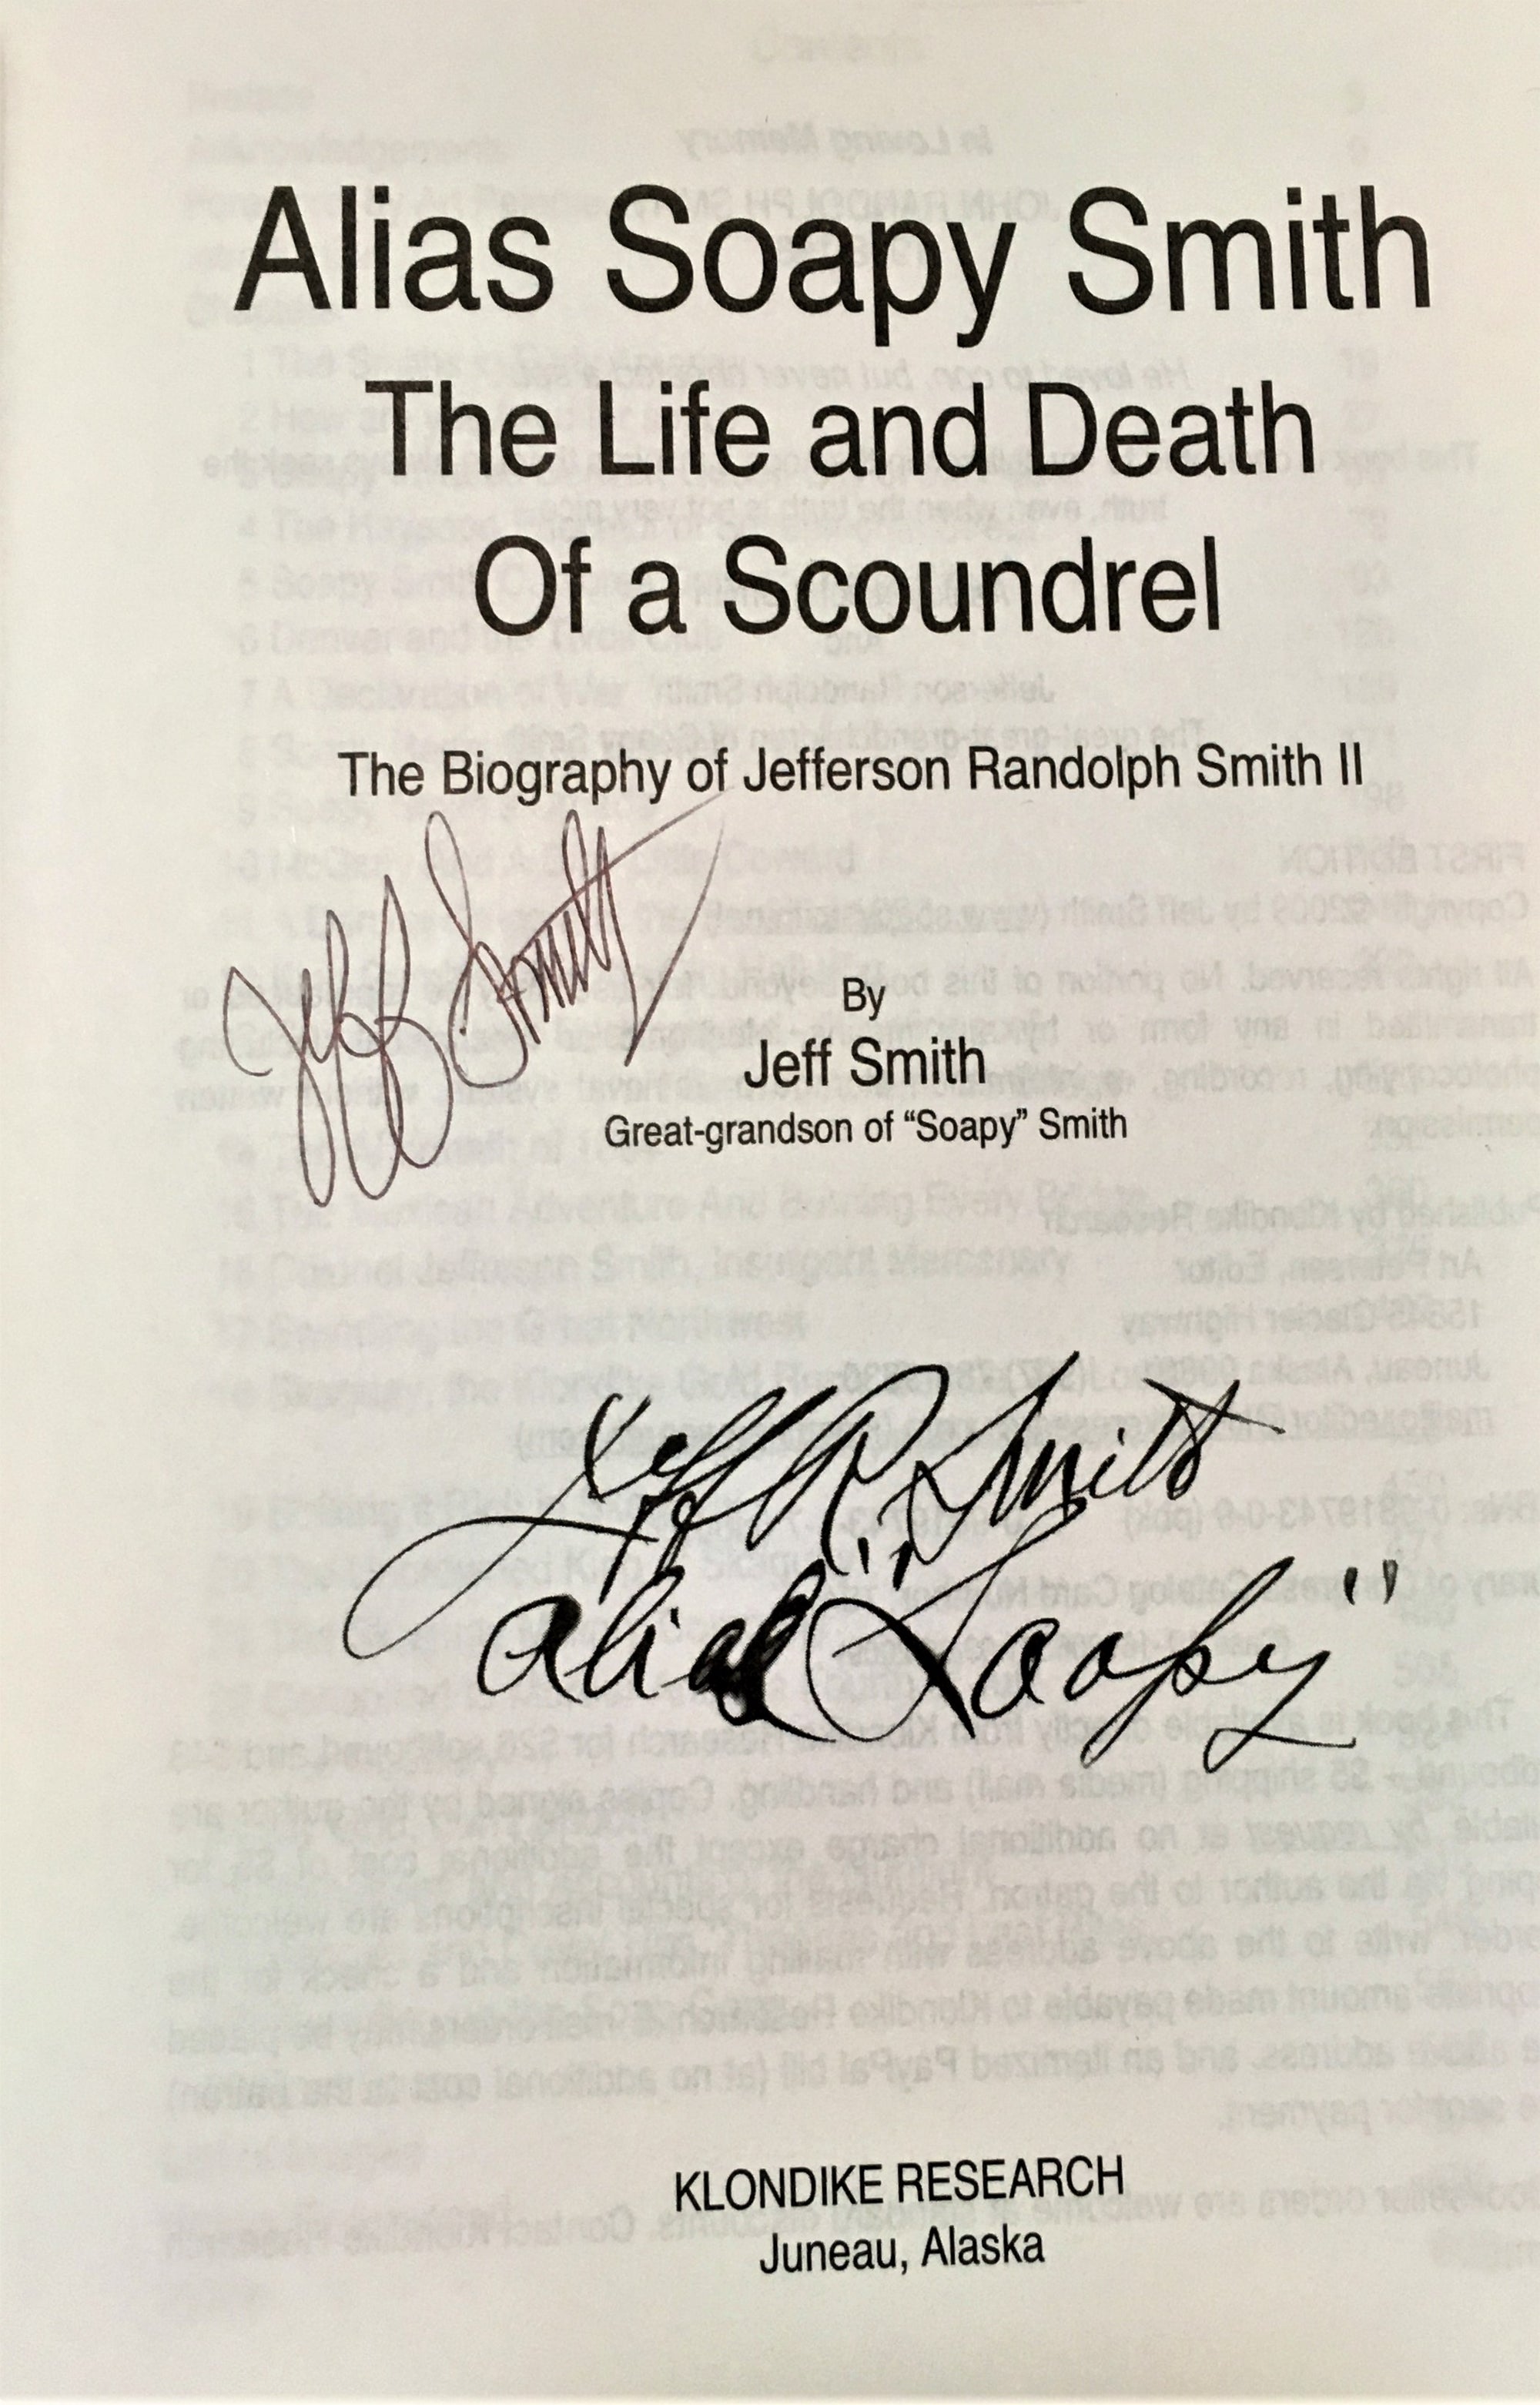 Alias Soapy Smith The Life and Death of a Scoundrel Signatures